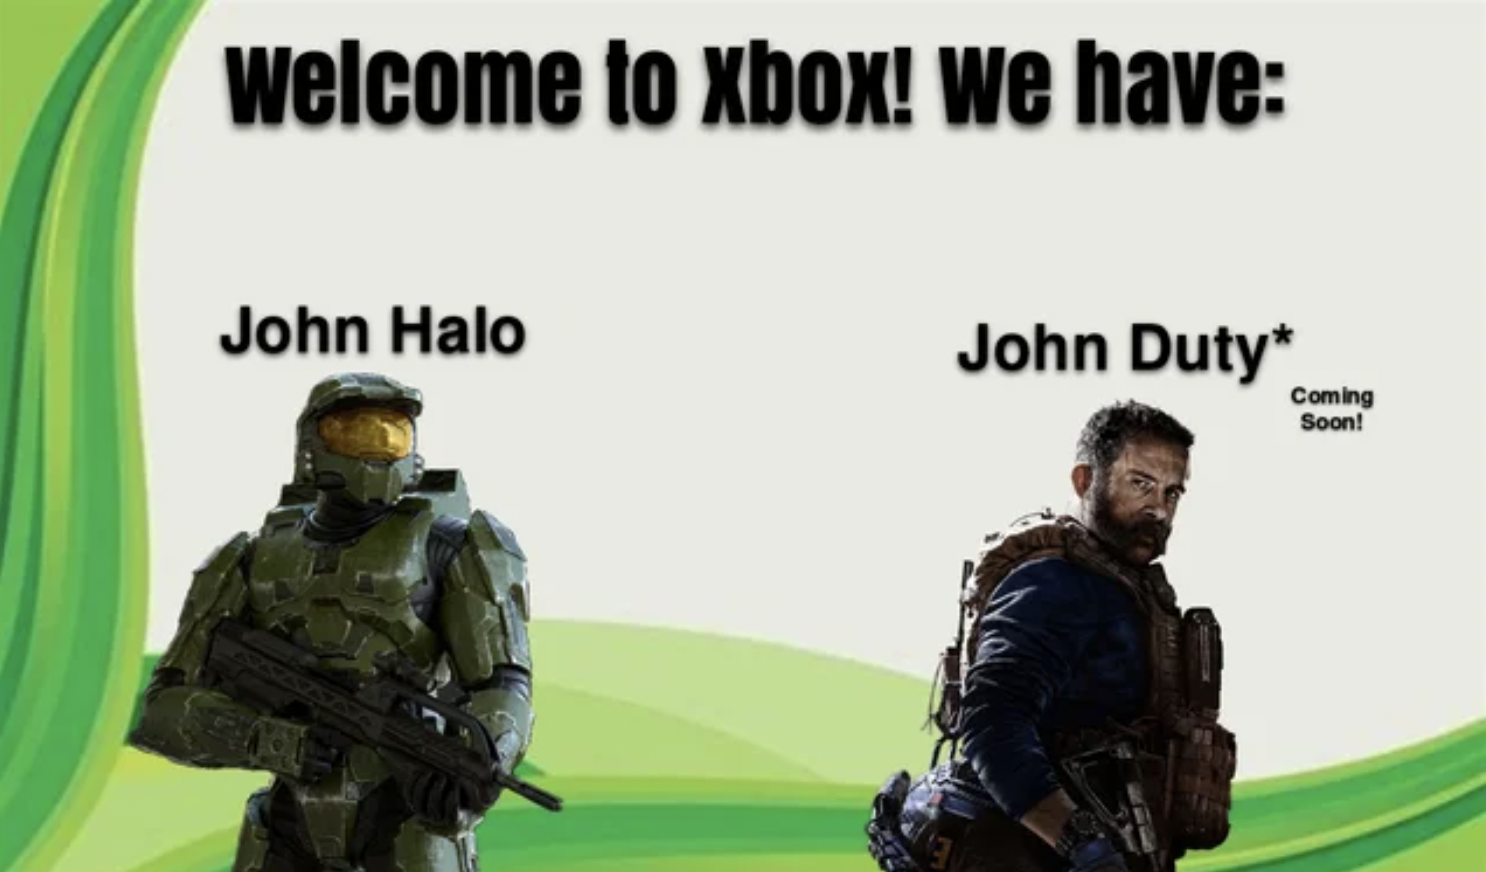 gaming memes - soldier - Welcome to Xbox! We have John Halo John Duty Coming Soon!